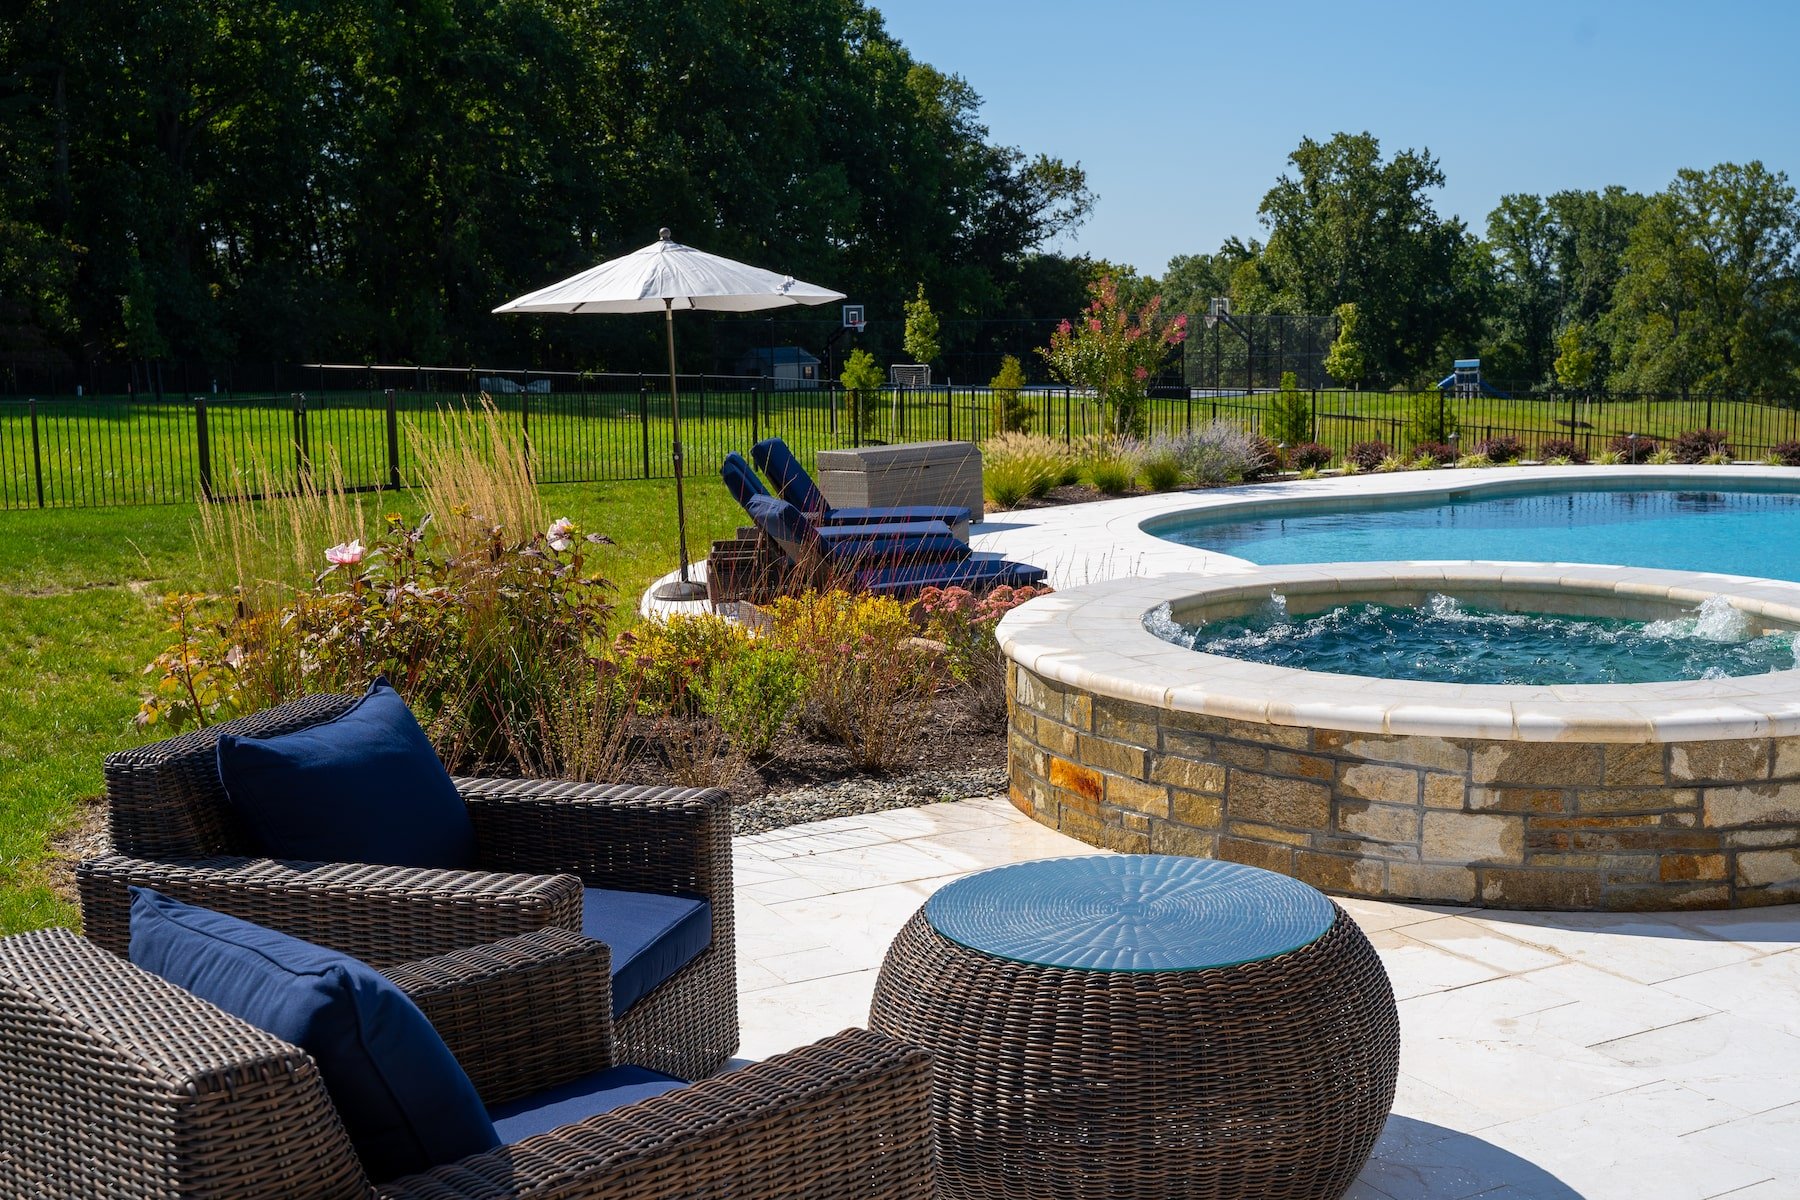 patio furniture custom spa pool outdoor living landscaping patio clarksville md